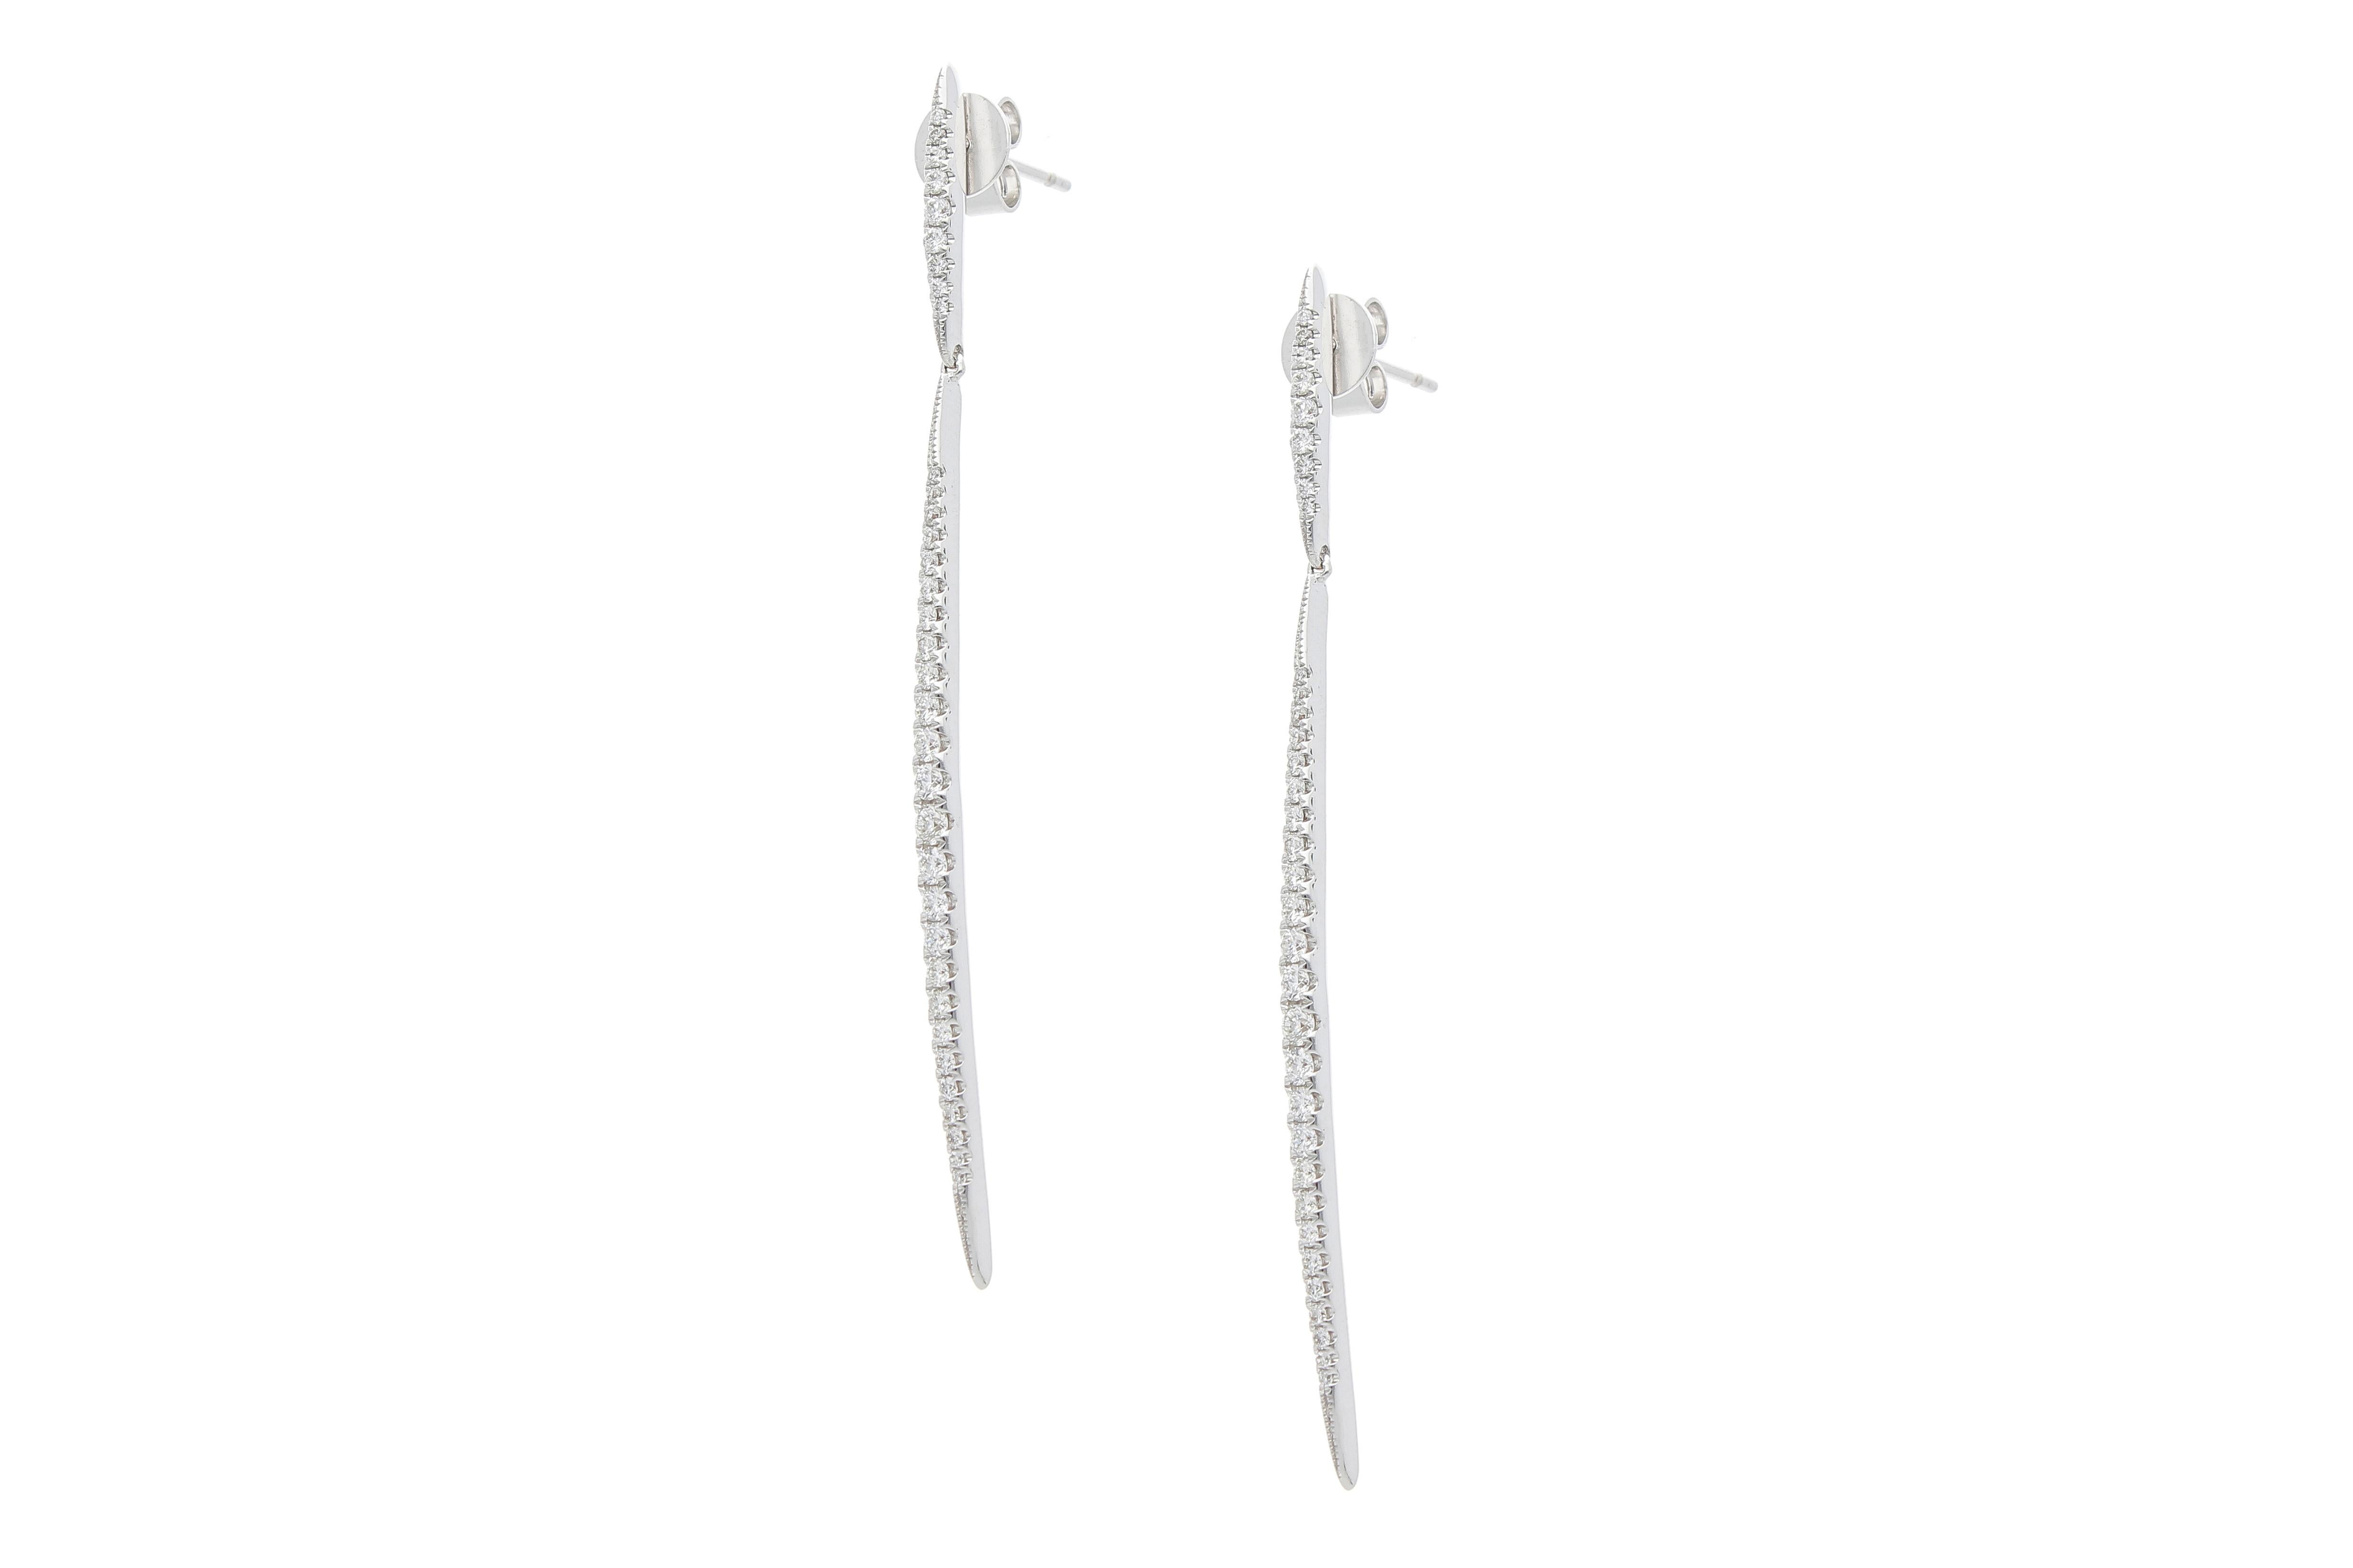 Modern Earrings with 0.74 Ct of Gradated Diamonds, on Hanging Bars, 18 Kt White Gold For Sale